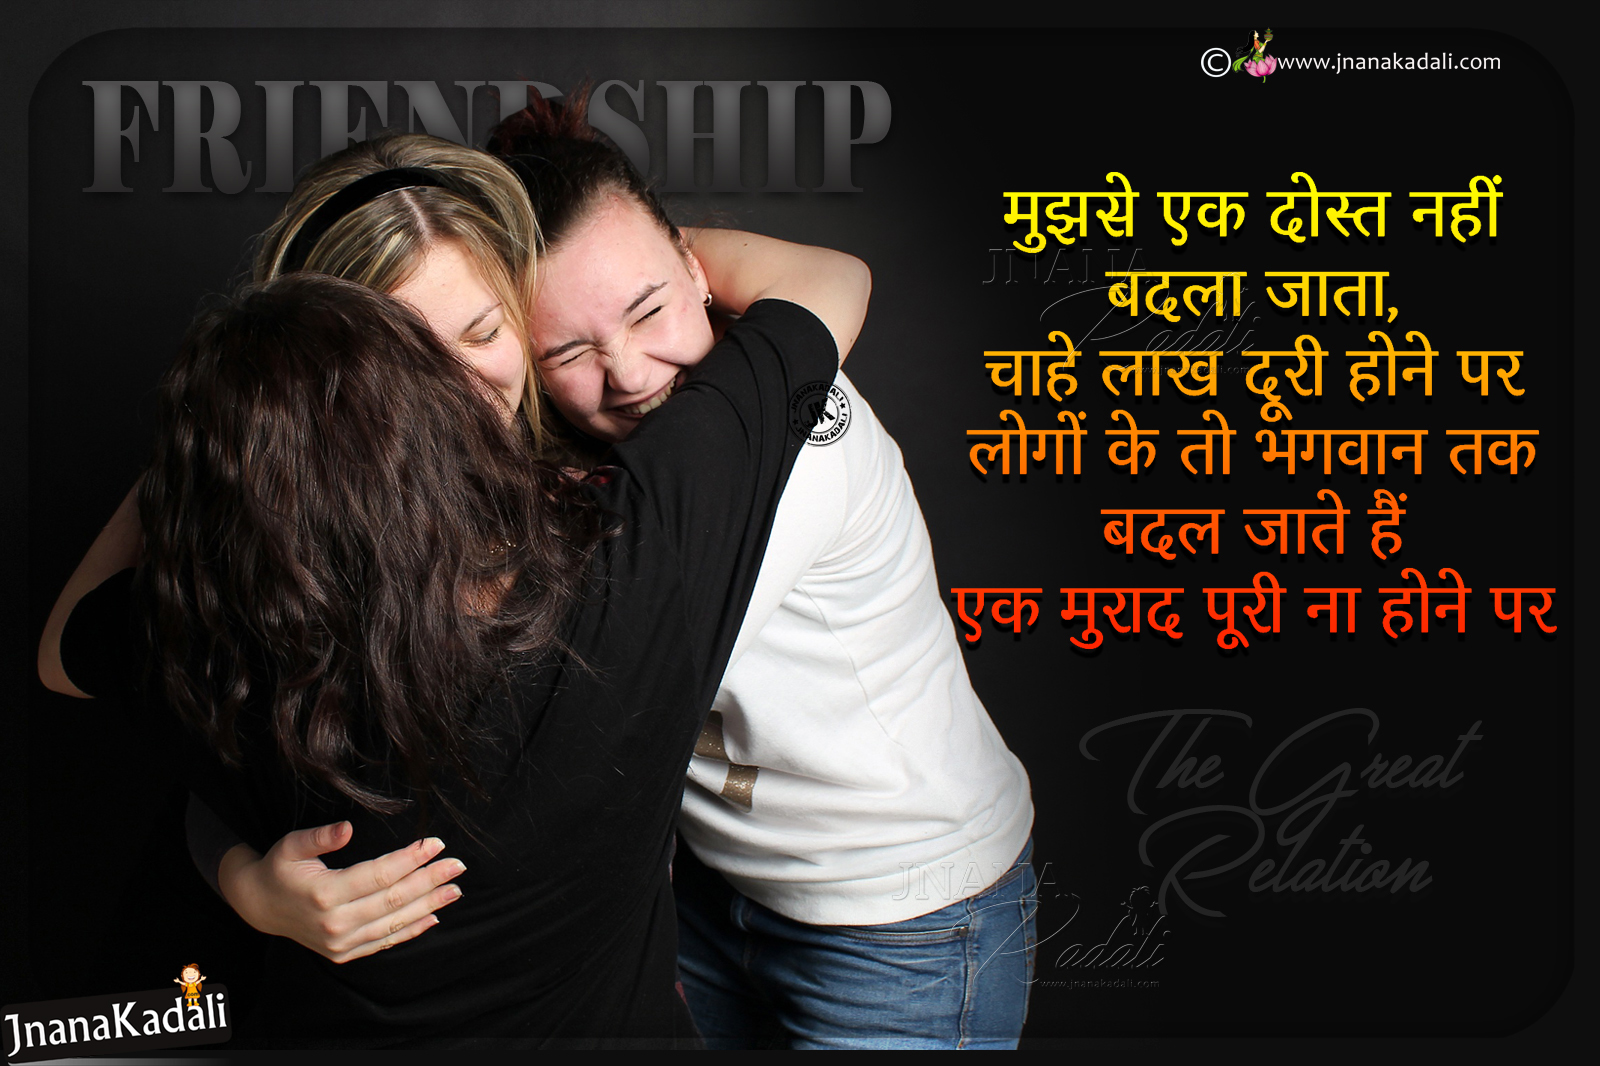 Friendship Quotes Messages in Hindi-Heart Touching Hindi Friendship ...